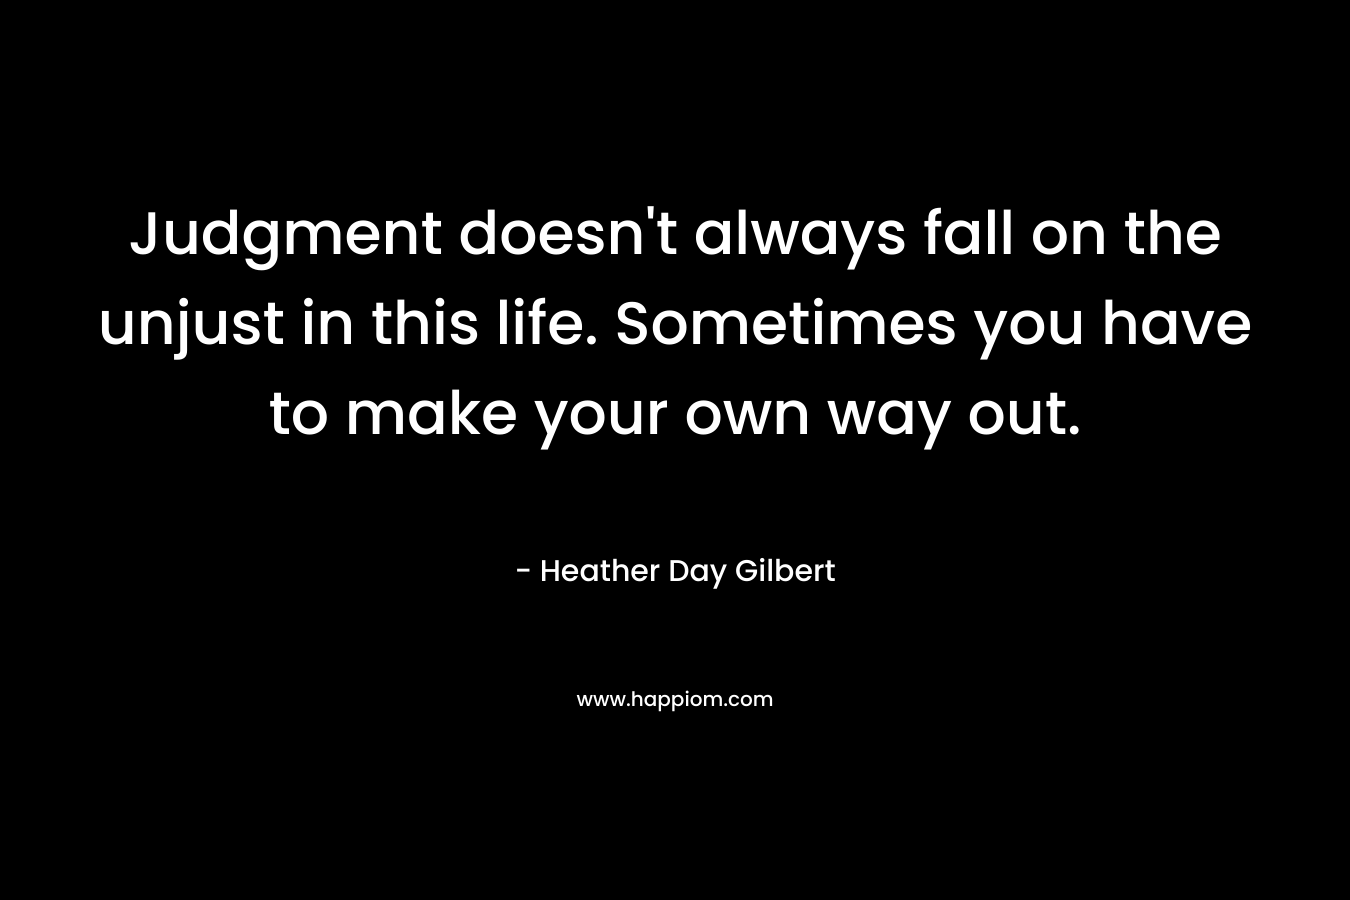 Judgment doesn’t always fall on the unjust in this life. Sometimes you have to make your own way out. – Heather Day Gilbert